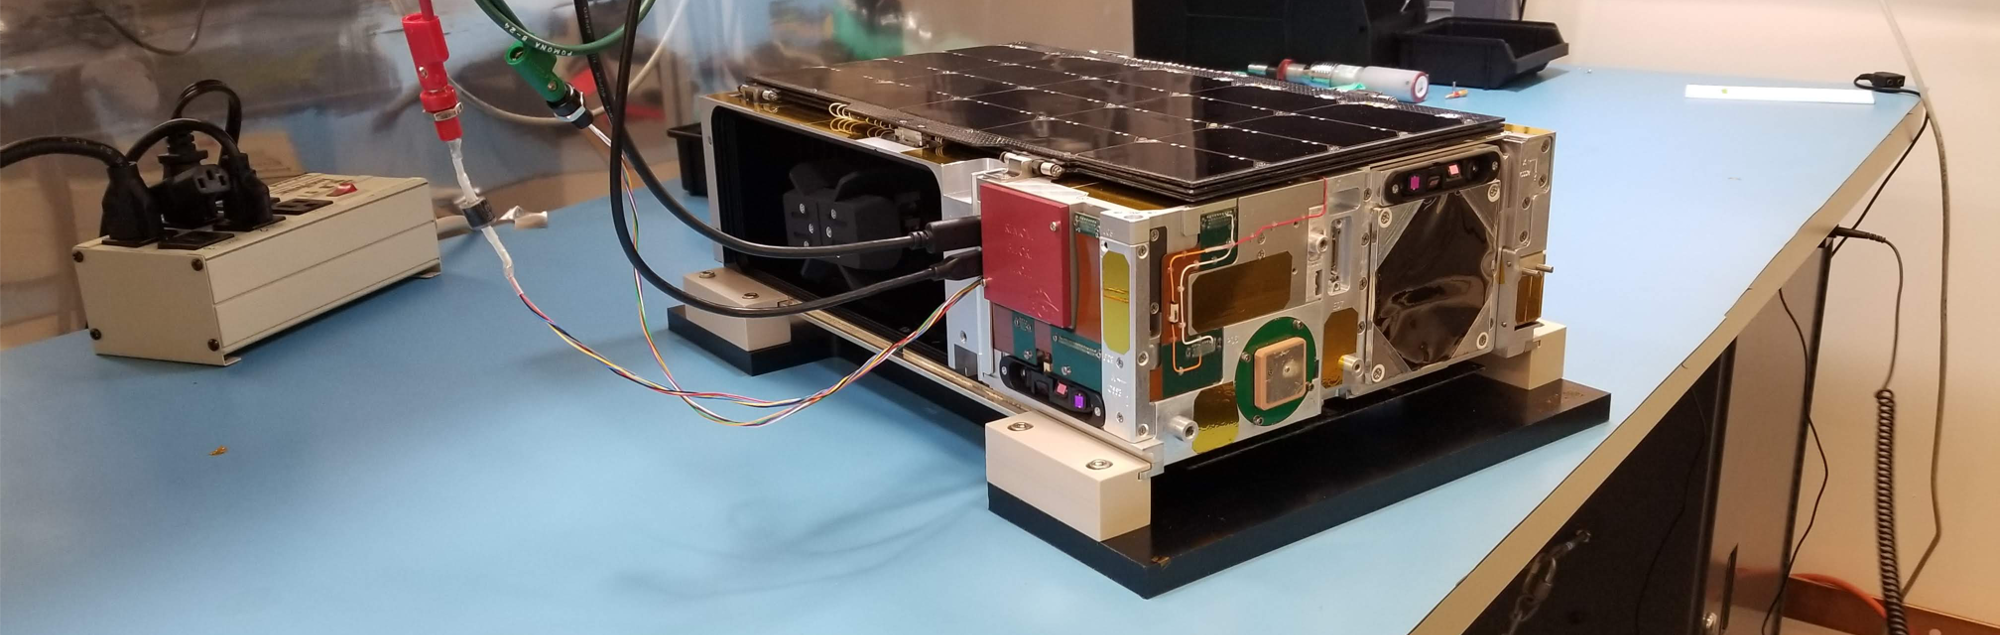 The CUTE cubesat on a bench in a lab.